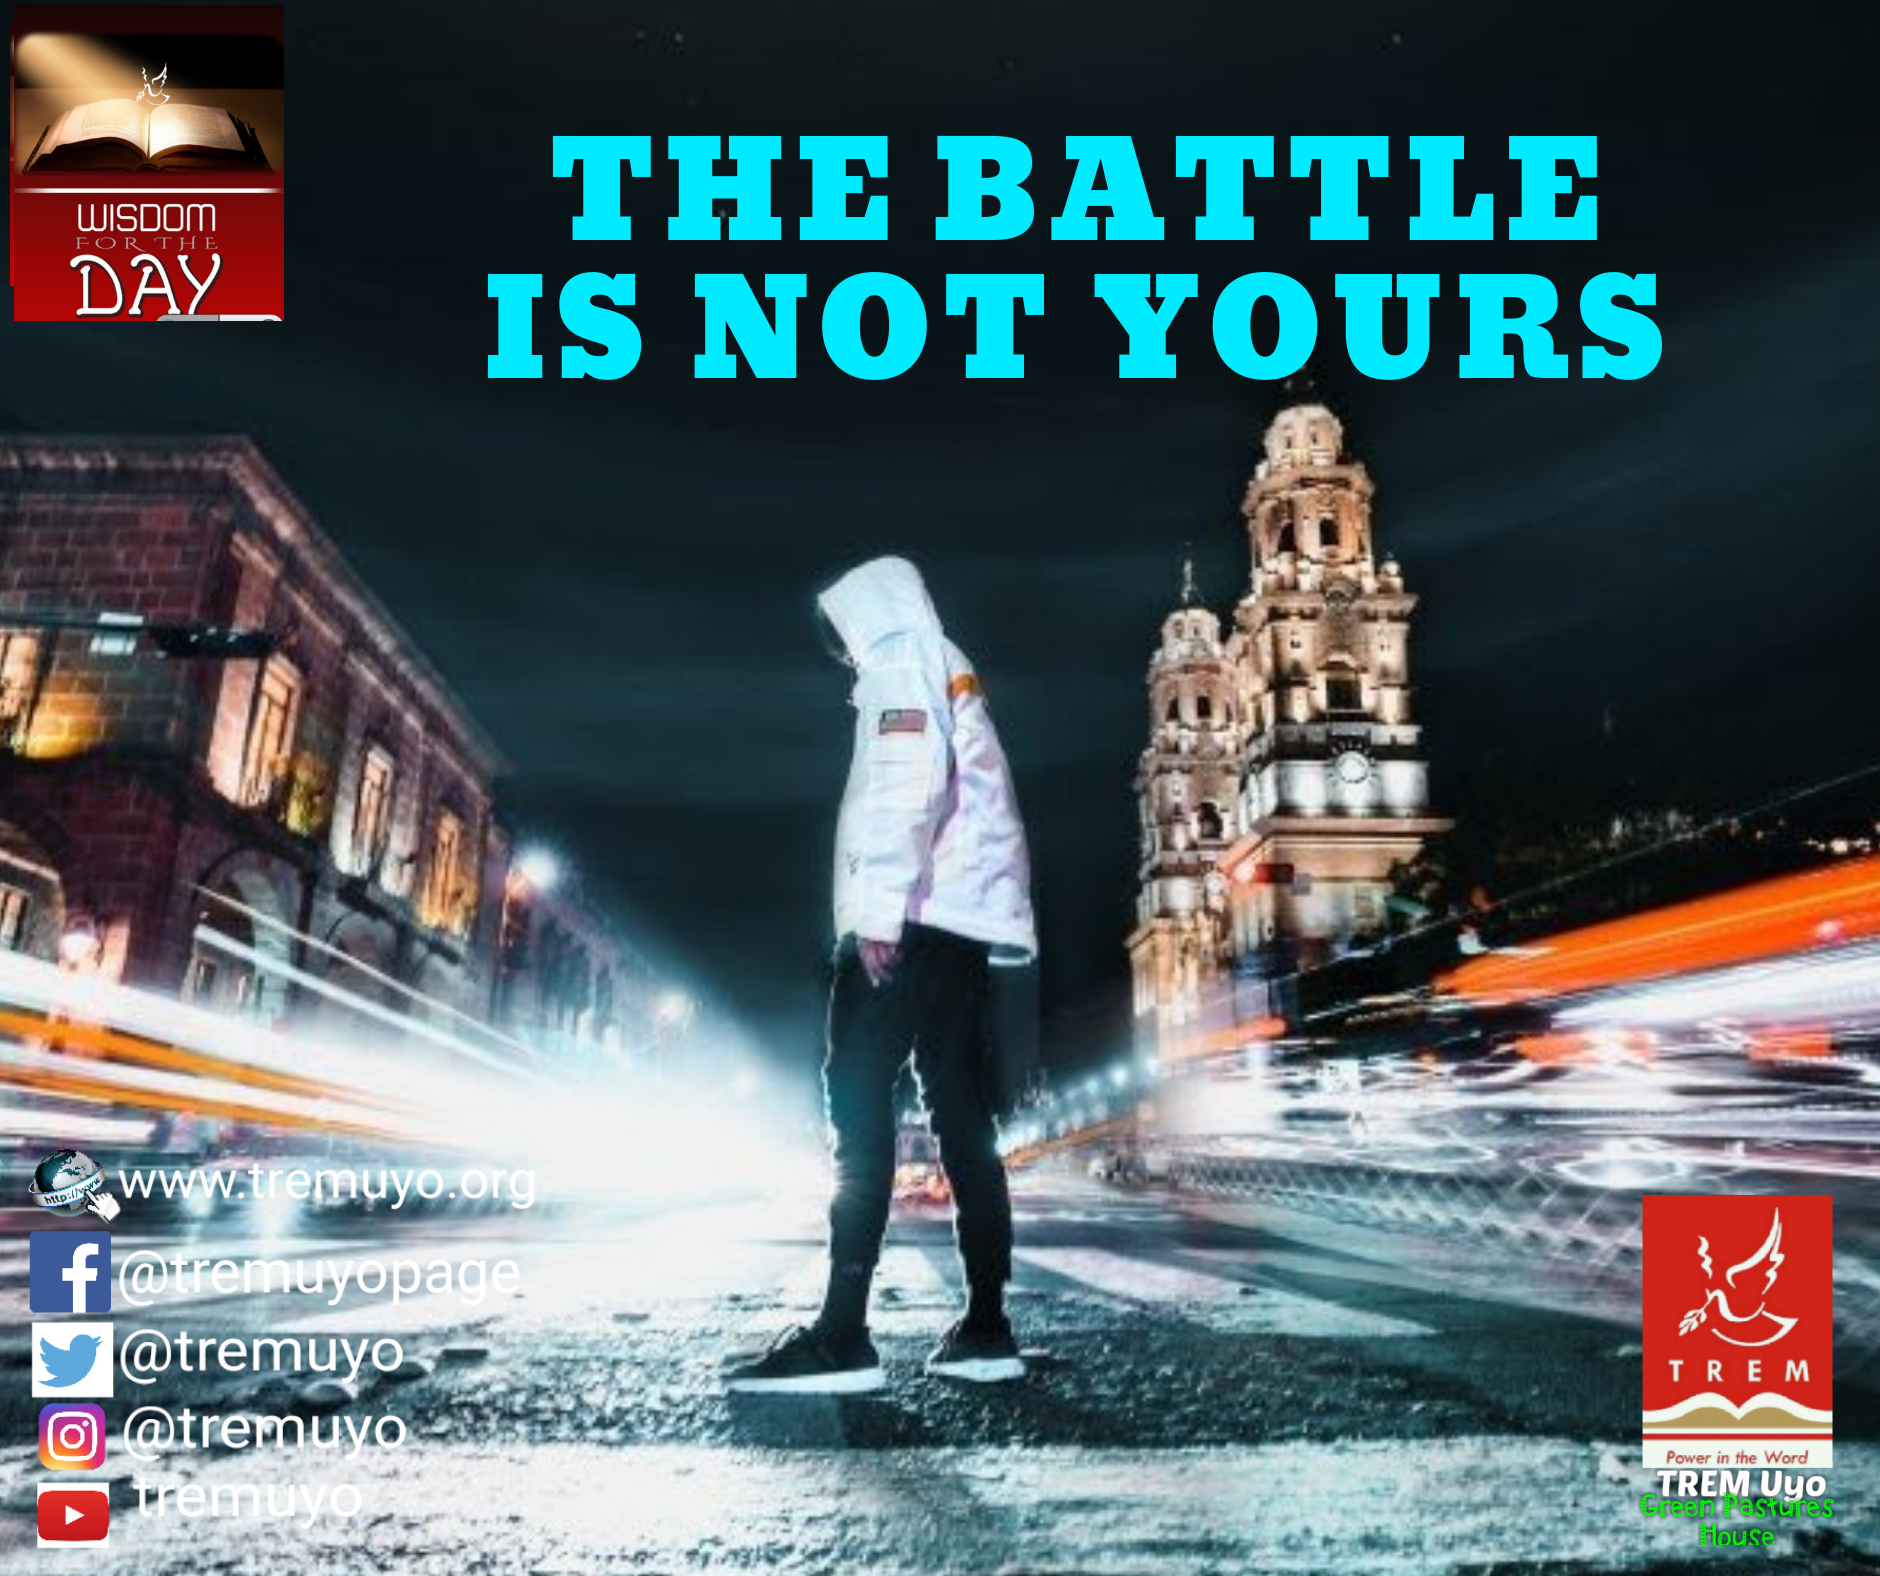 THE BATTLE IS NOT YOURS